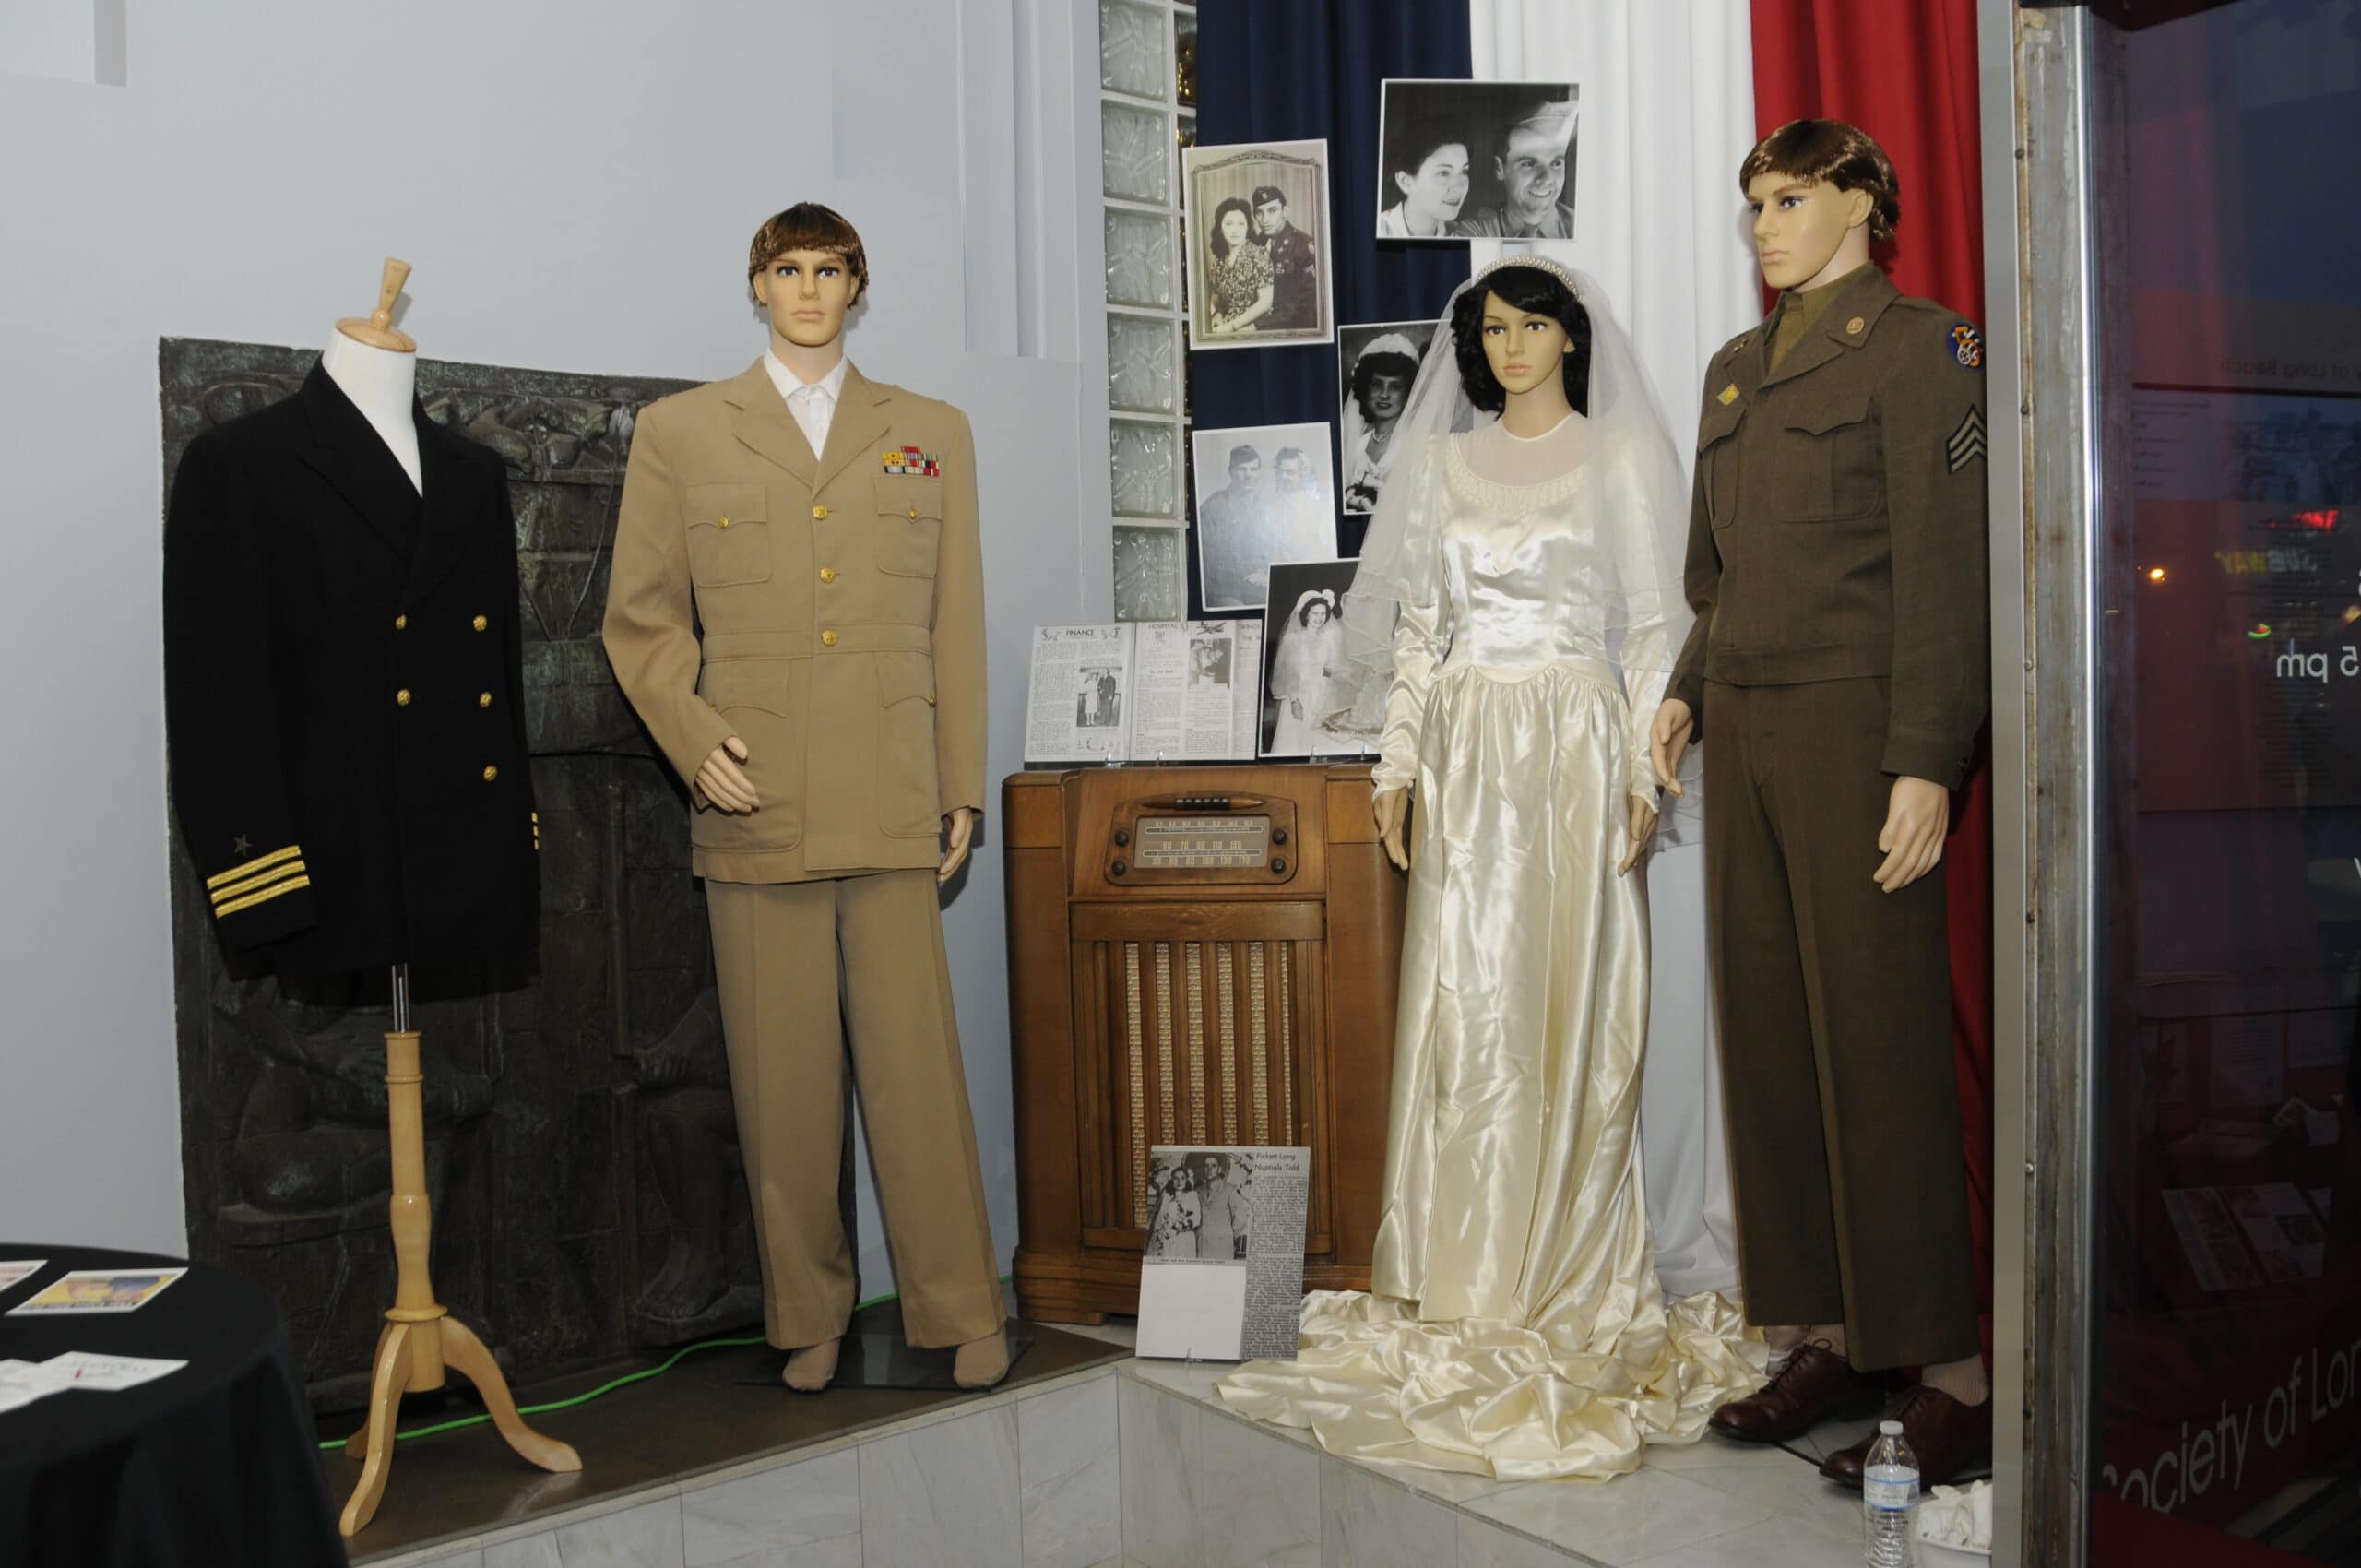 Pearl harbor manikins in costume at opening reception